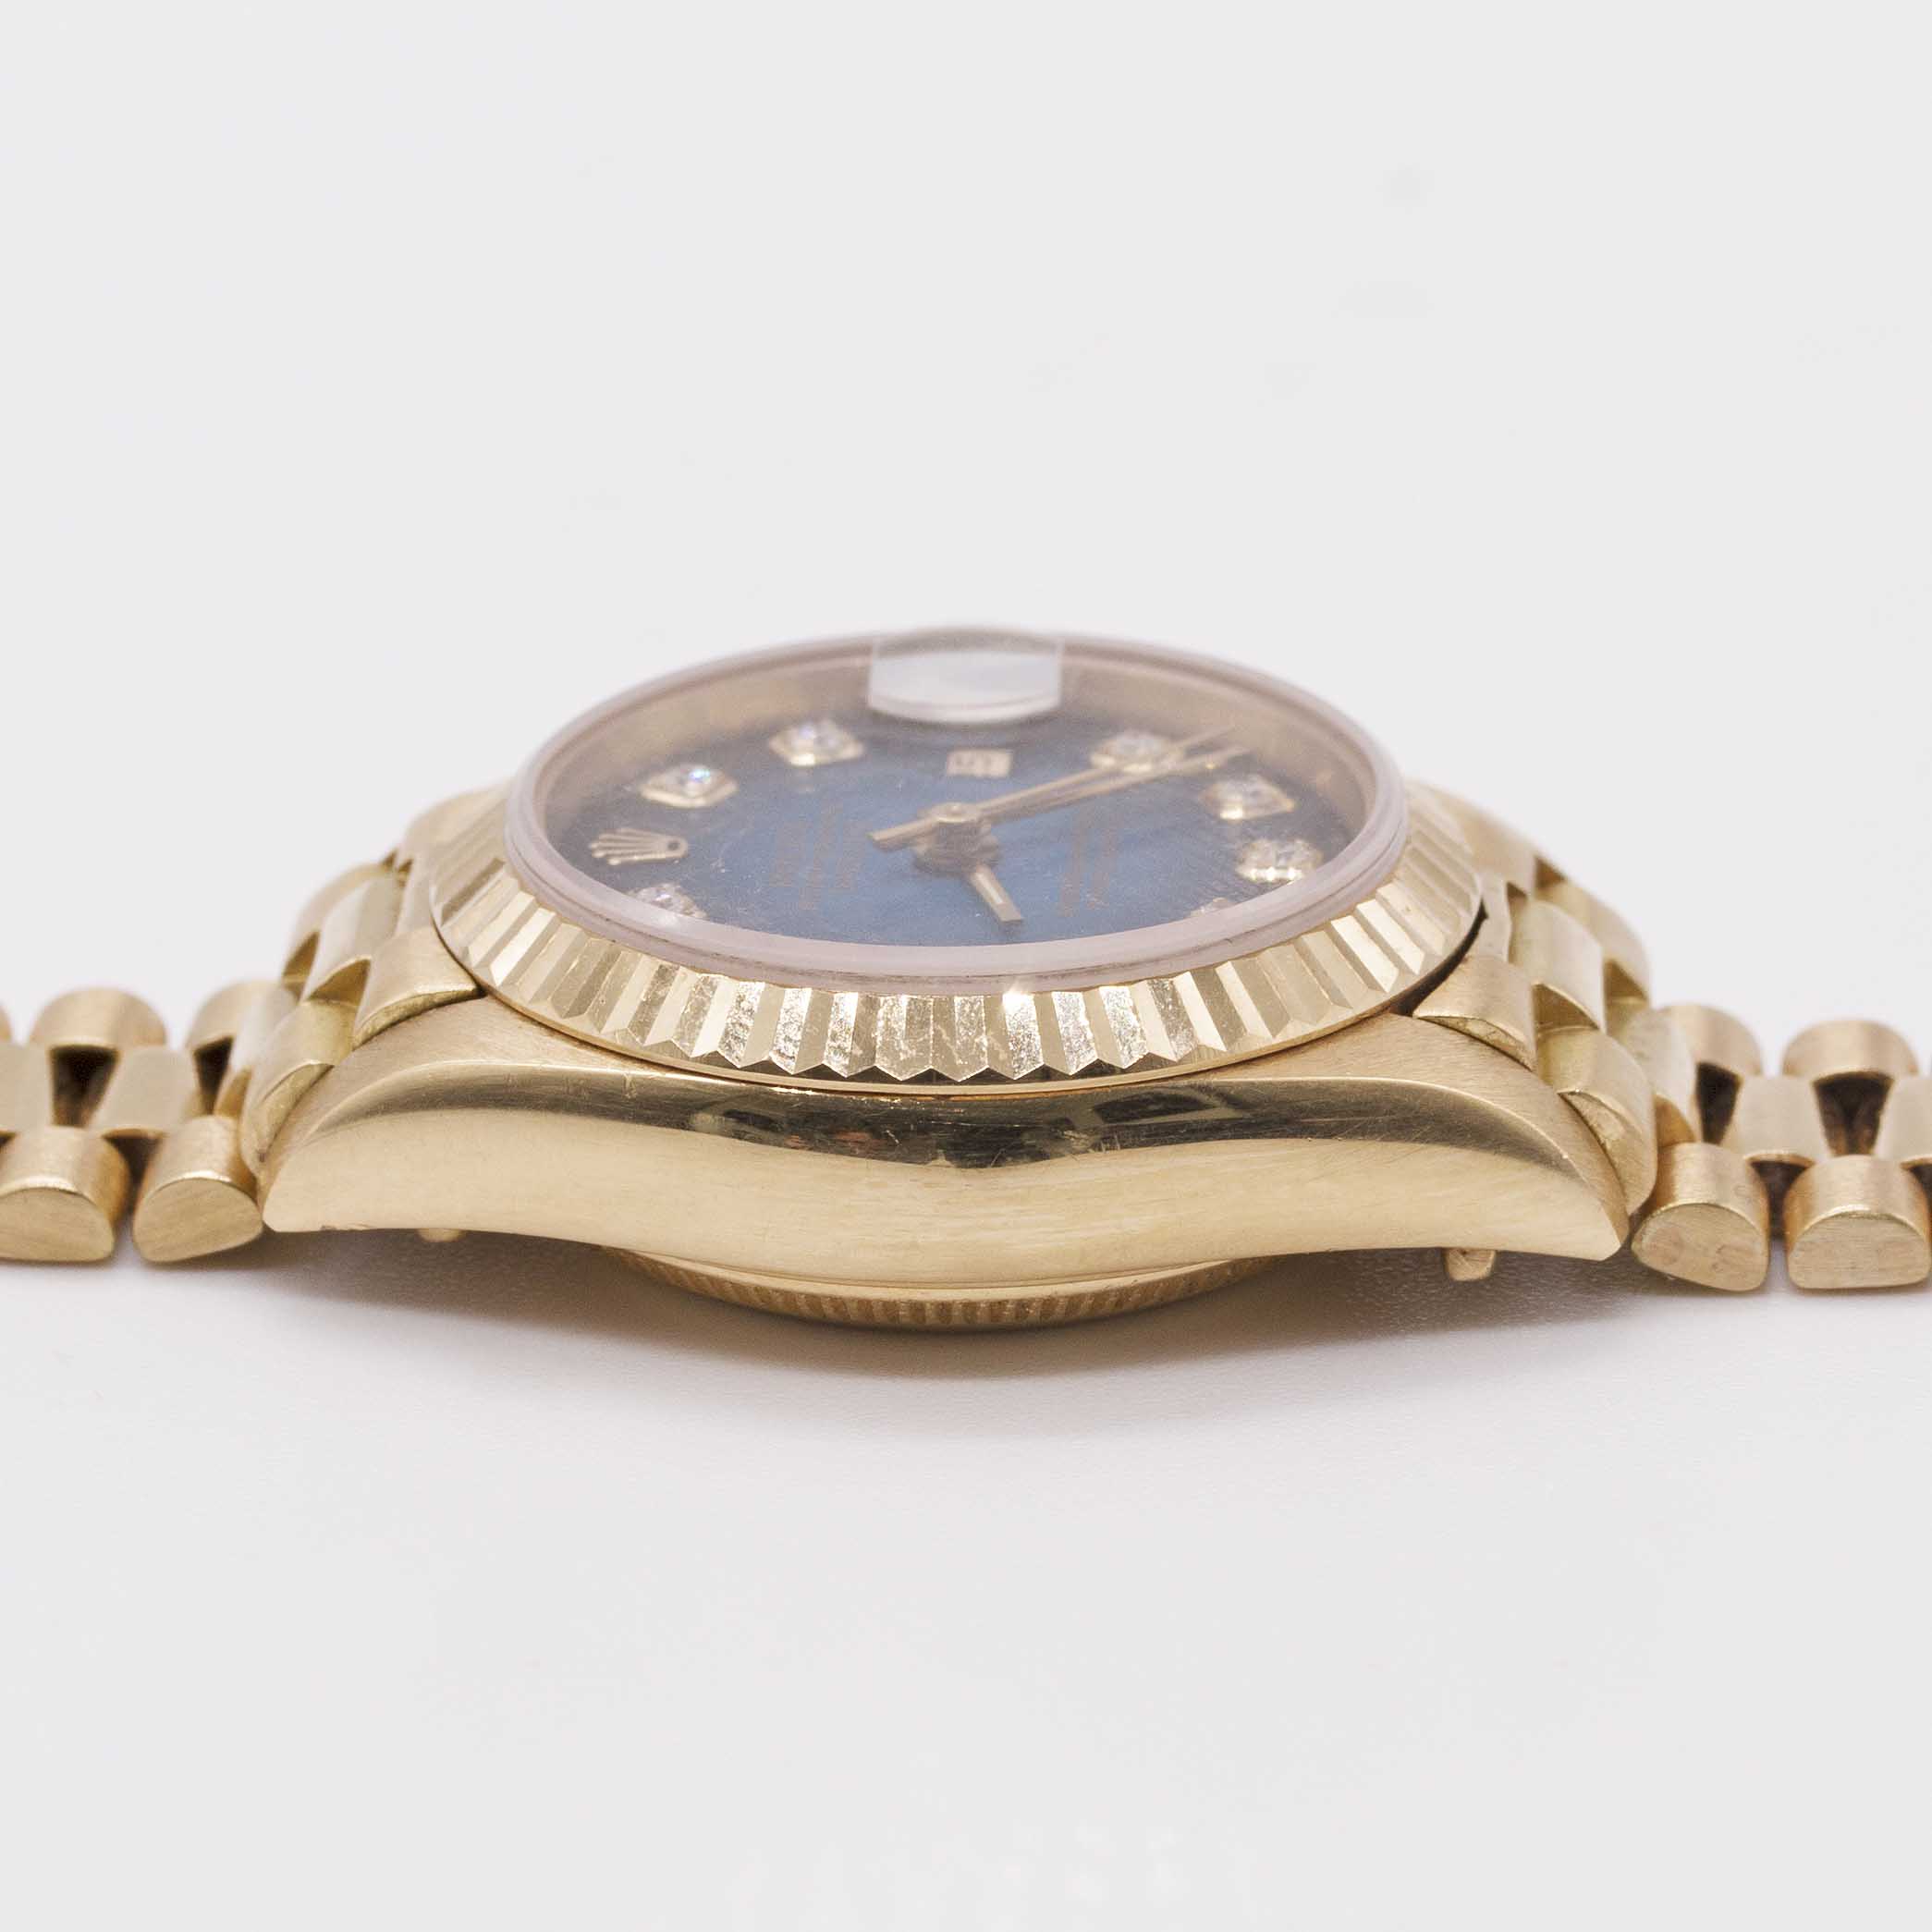 A LADIES 18K SOLID GOLD ROLEX OYSTER PERPETUAL DATEJUST BRACELET WATCH CIRCA 1985, REF. 69178 WITH - Image 9 of 10